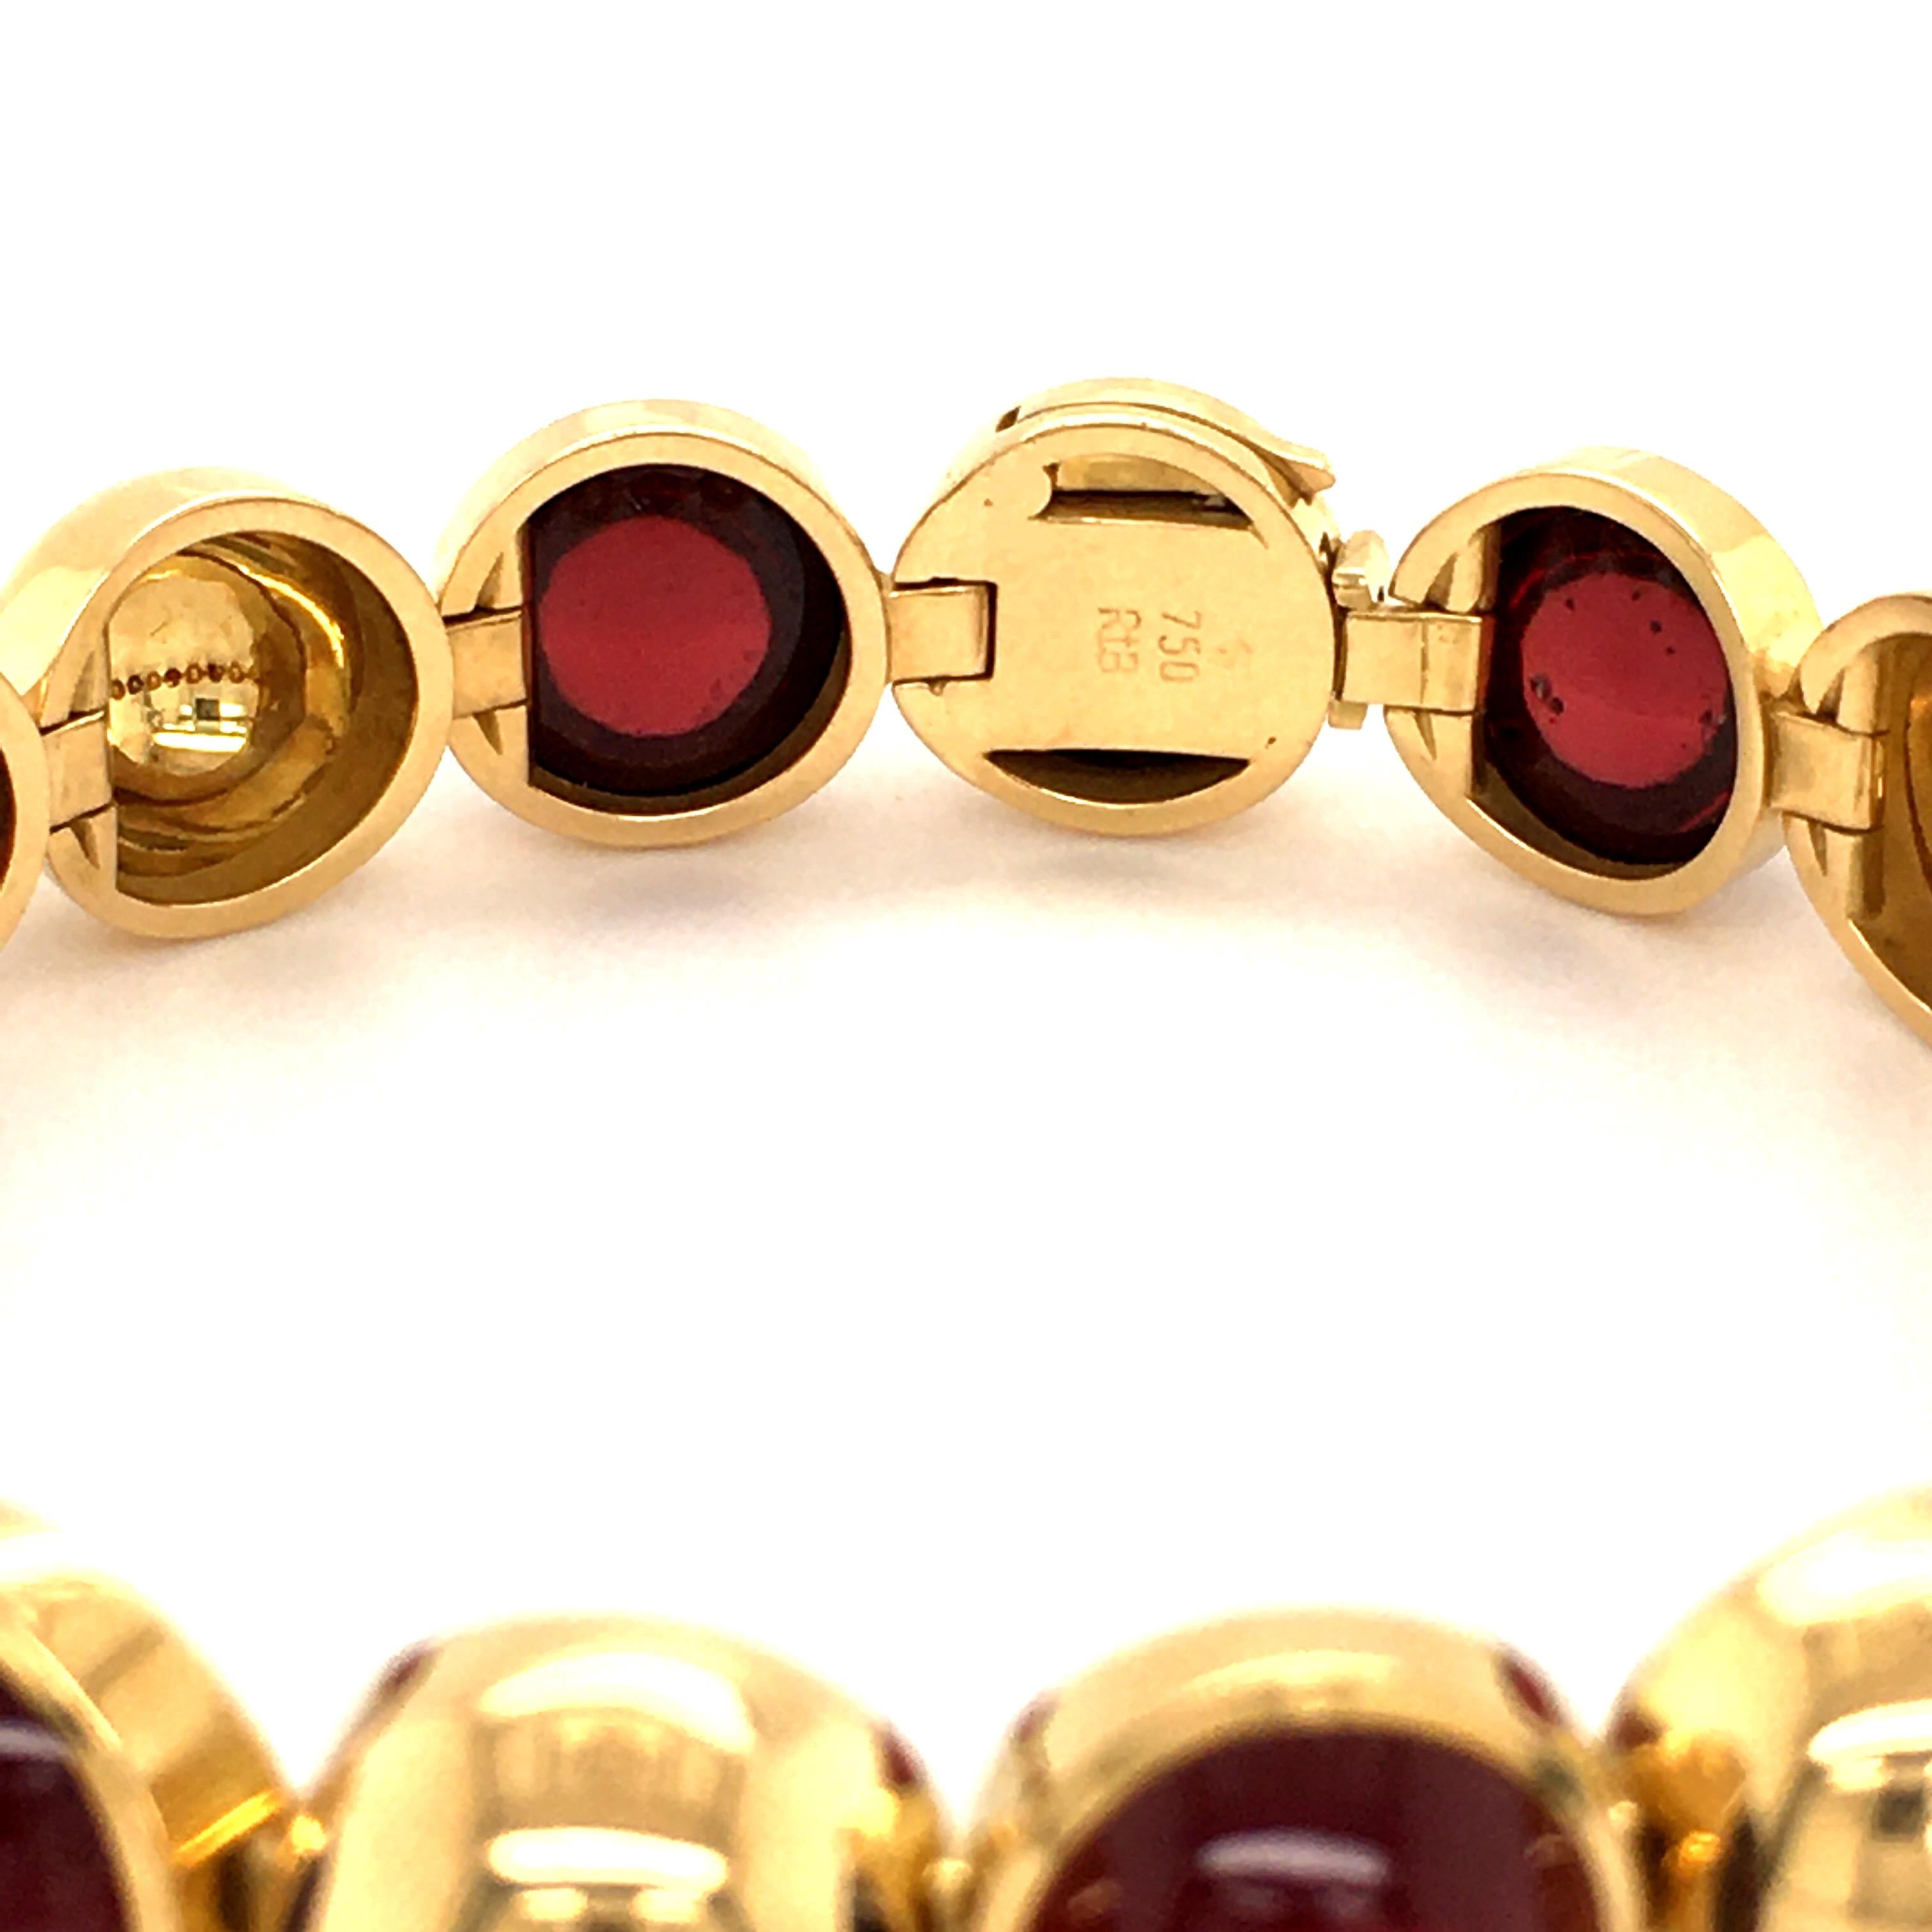 This bracelet is made in yellow gold 750 with a safety clasp. 8 links are set with each 1 dark red cabochon cut garnet. It is in excellent condition. Nice item!

Length: 19 cm / 7.48 Inches
Maker's mark: RB
Assay mark: 750